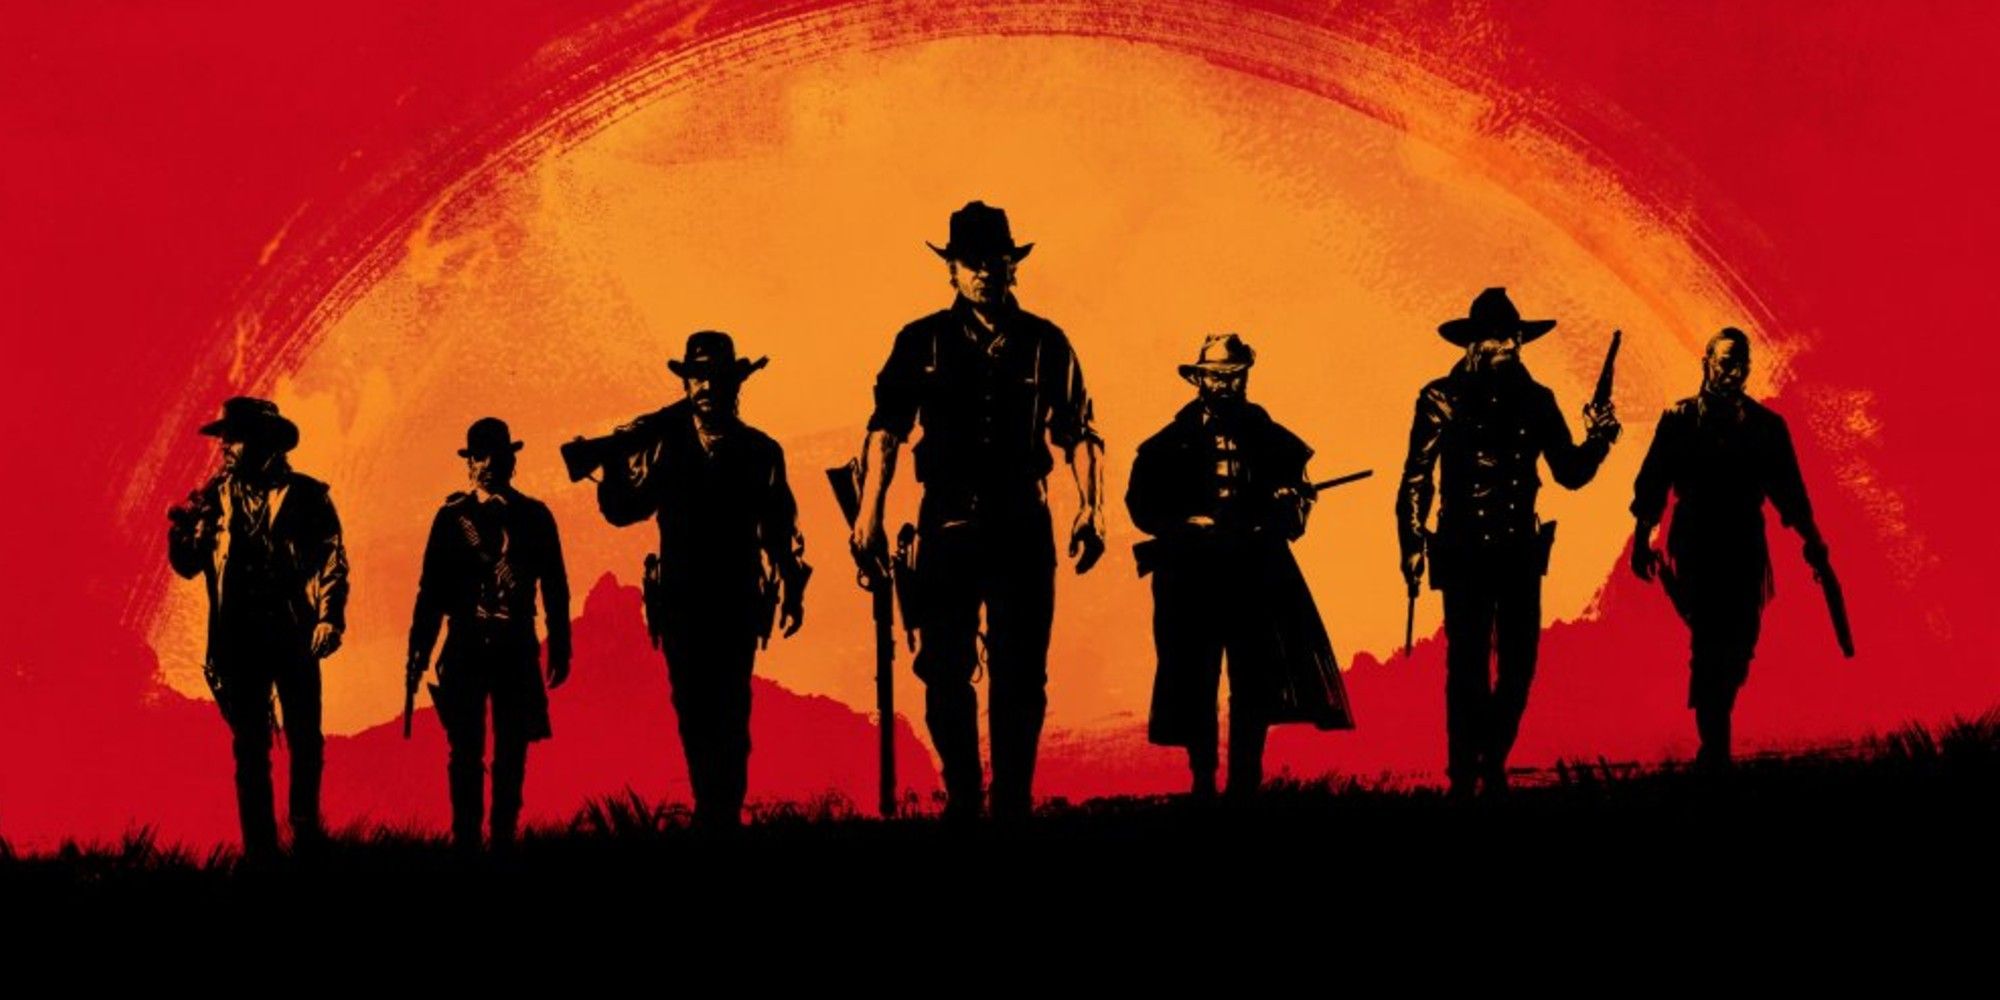 What Happened Between RDR2 and Red Dead Redemption